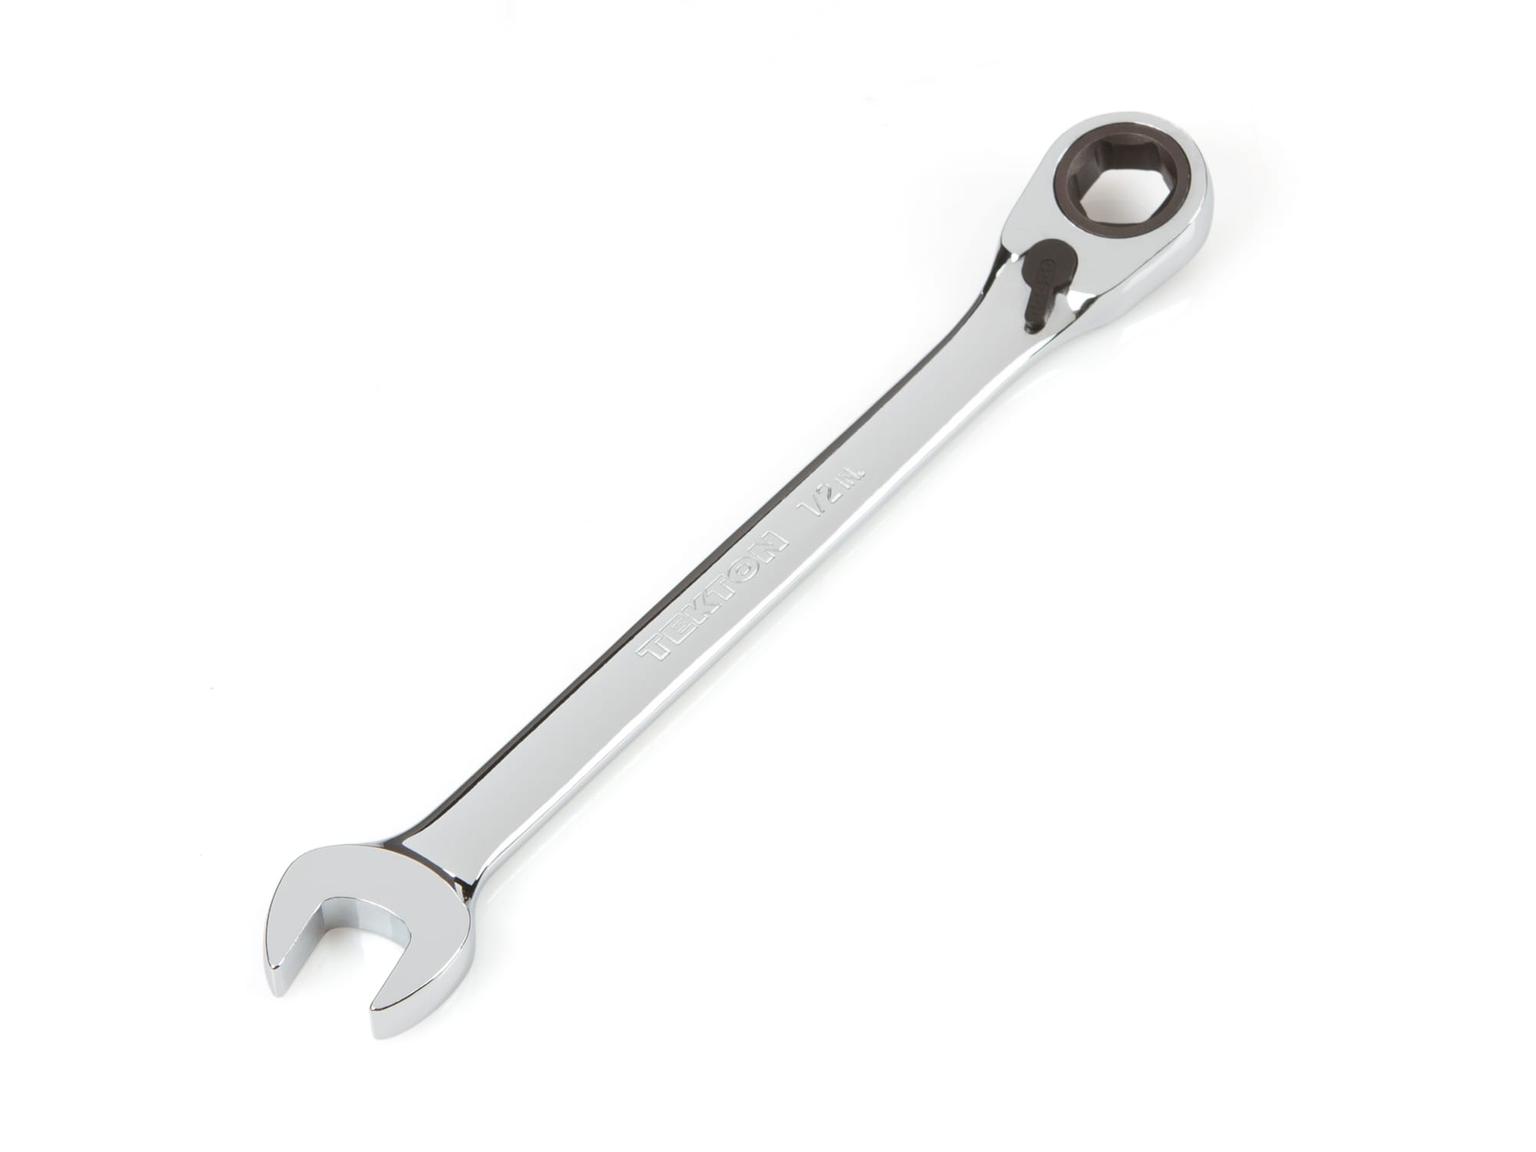 TEKTON WRN56010-T 1/2 Inch Reversible Ratcheting Combination Wrench